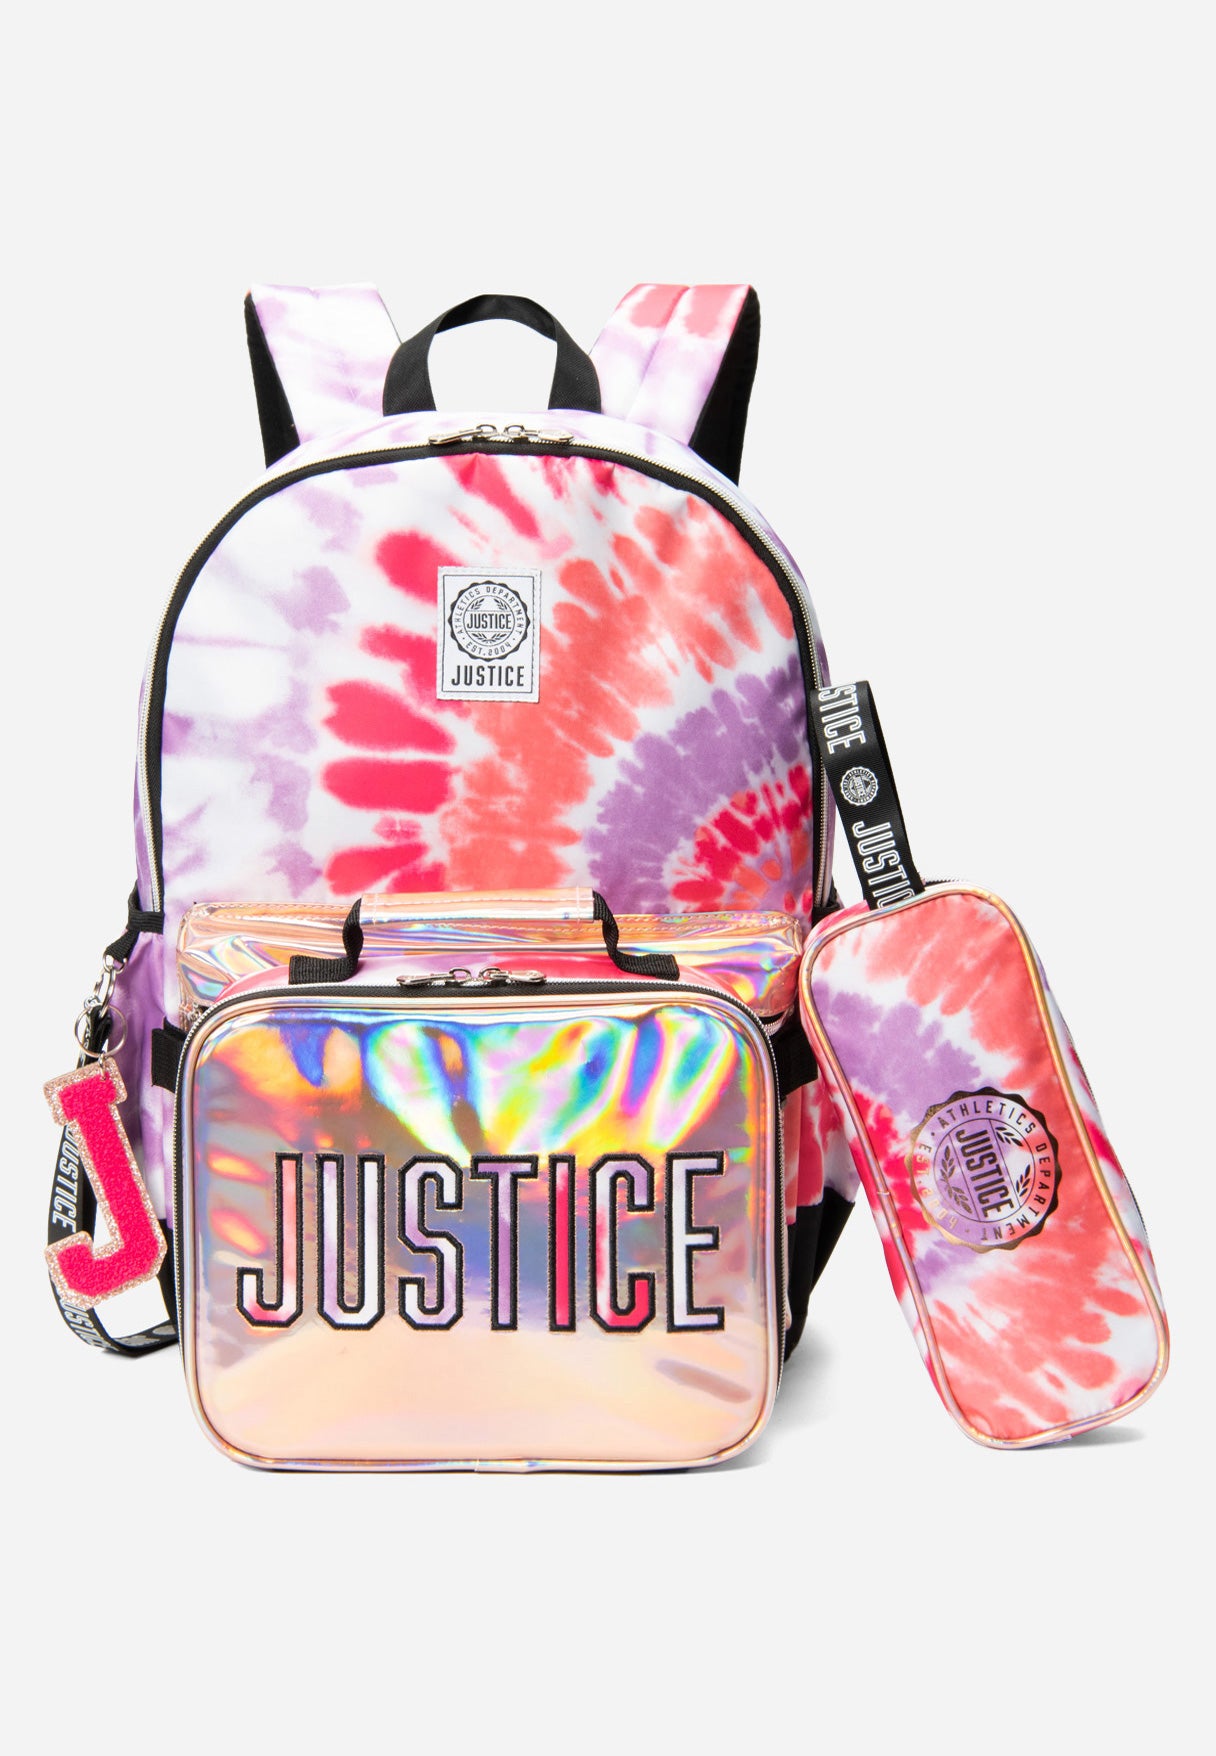 Justice Girl's Patterned Backpack Set in Warm Tiedye, Size One Size